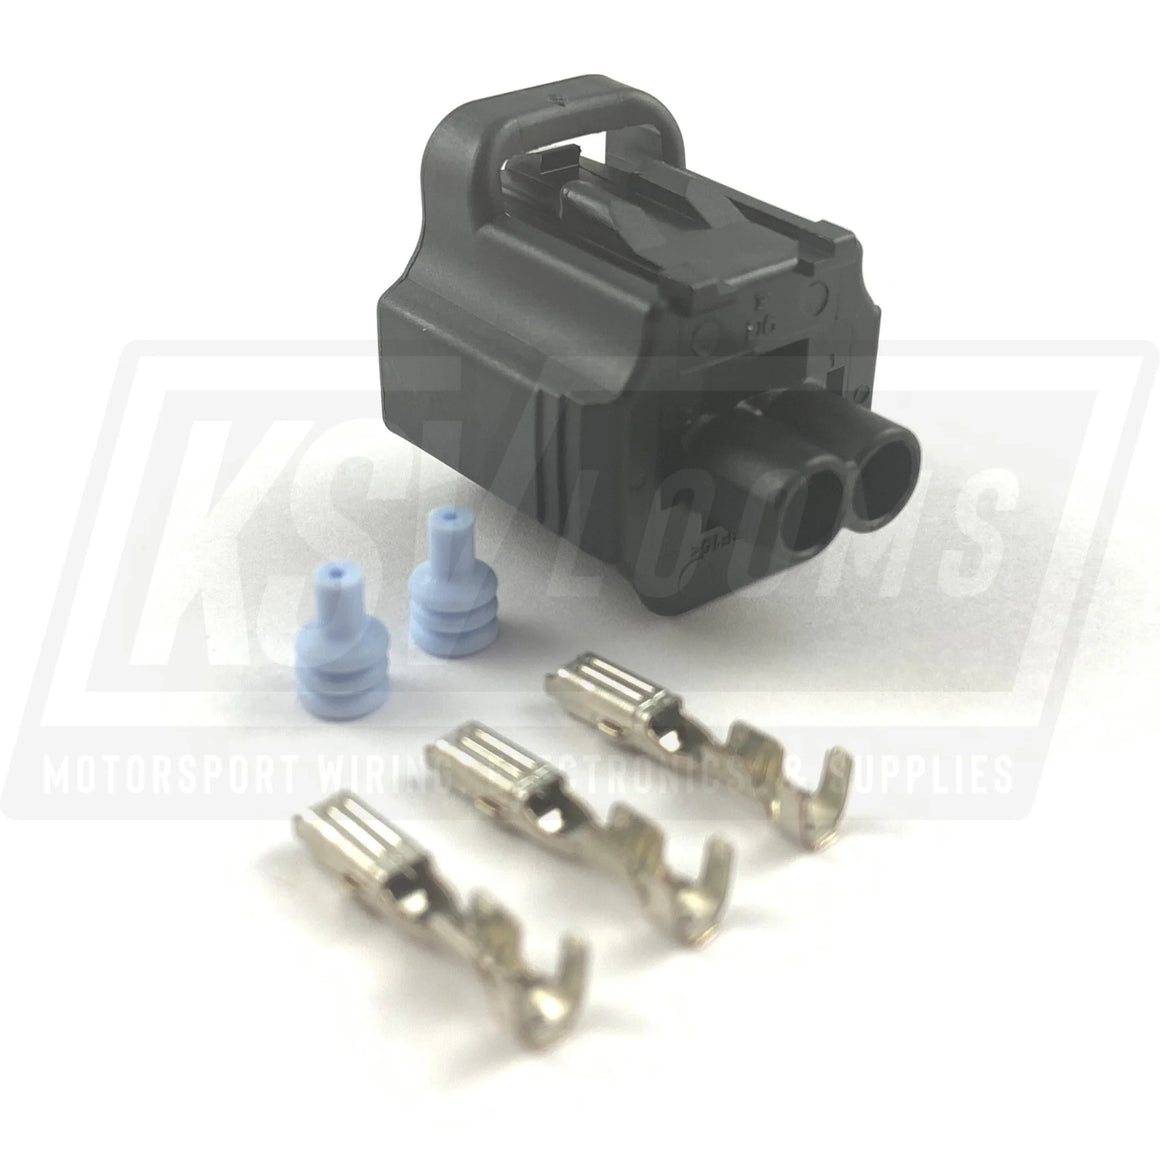 2-Way Connector Kit For Ford Mustang Iac (22-18 Awg)